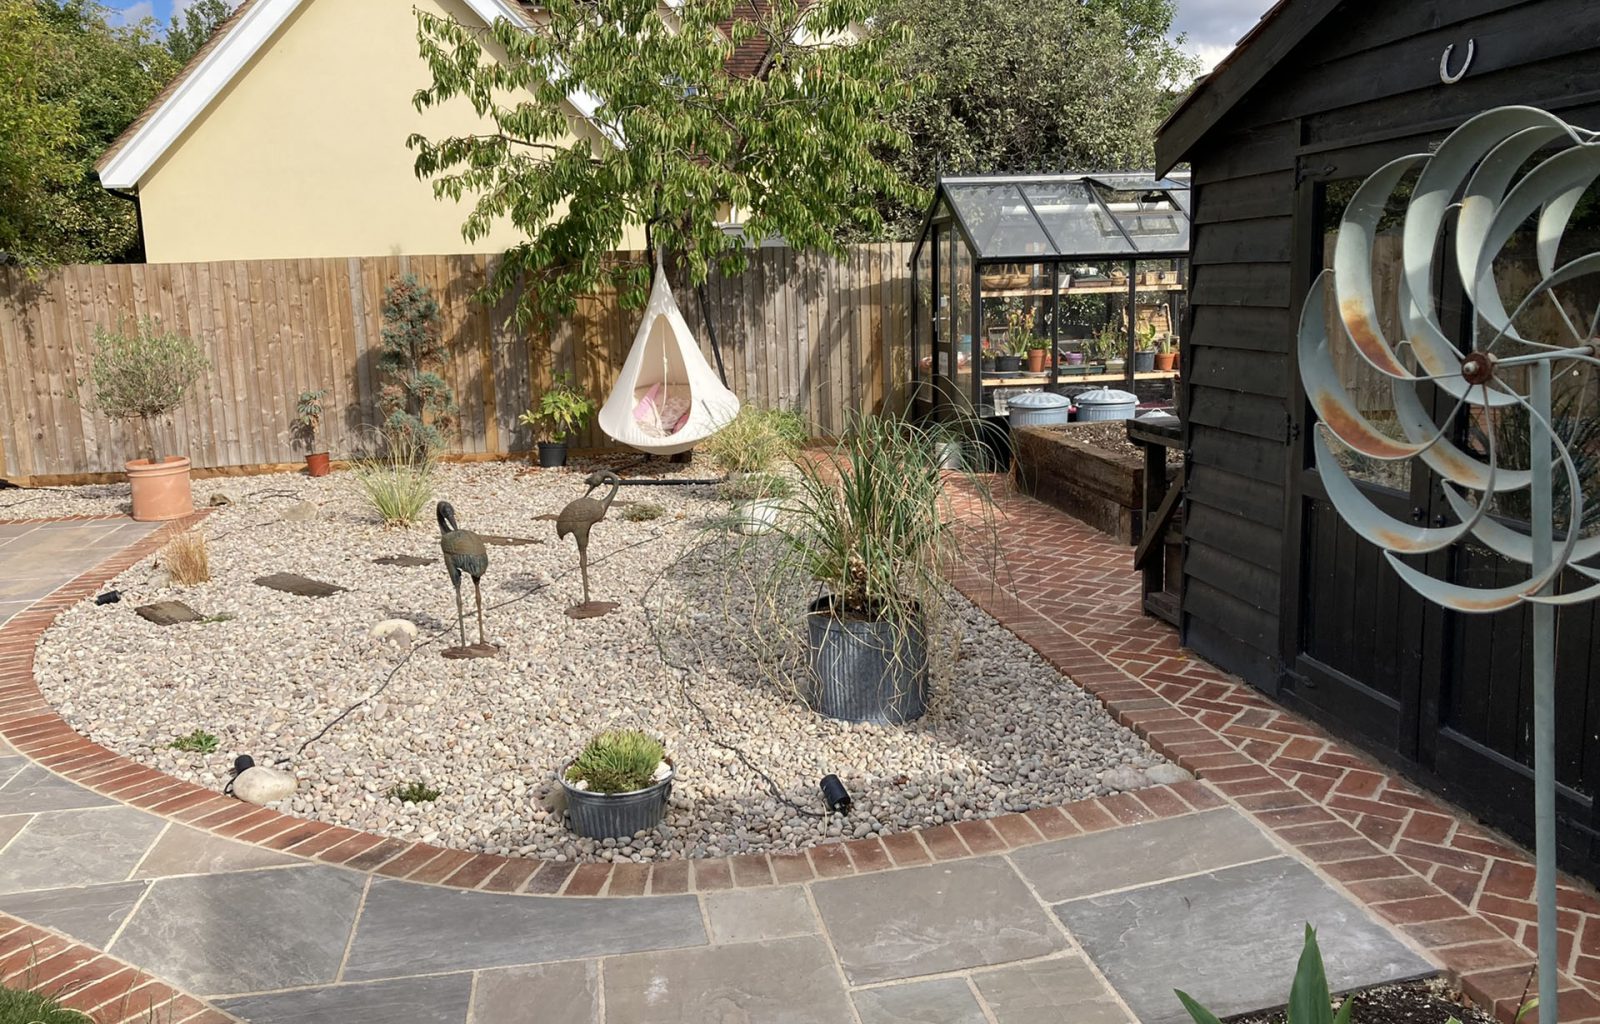 A domestic garden that features paved patio, stone covered borders, planted containers, a green house, hammock and a shed.